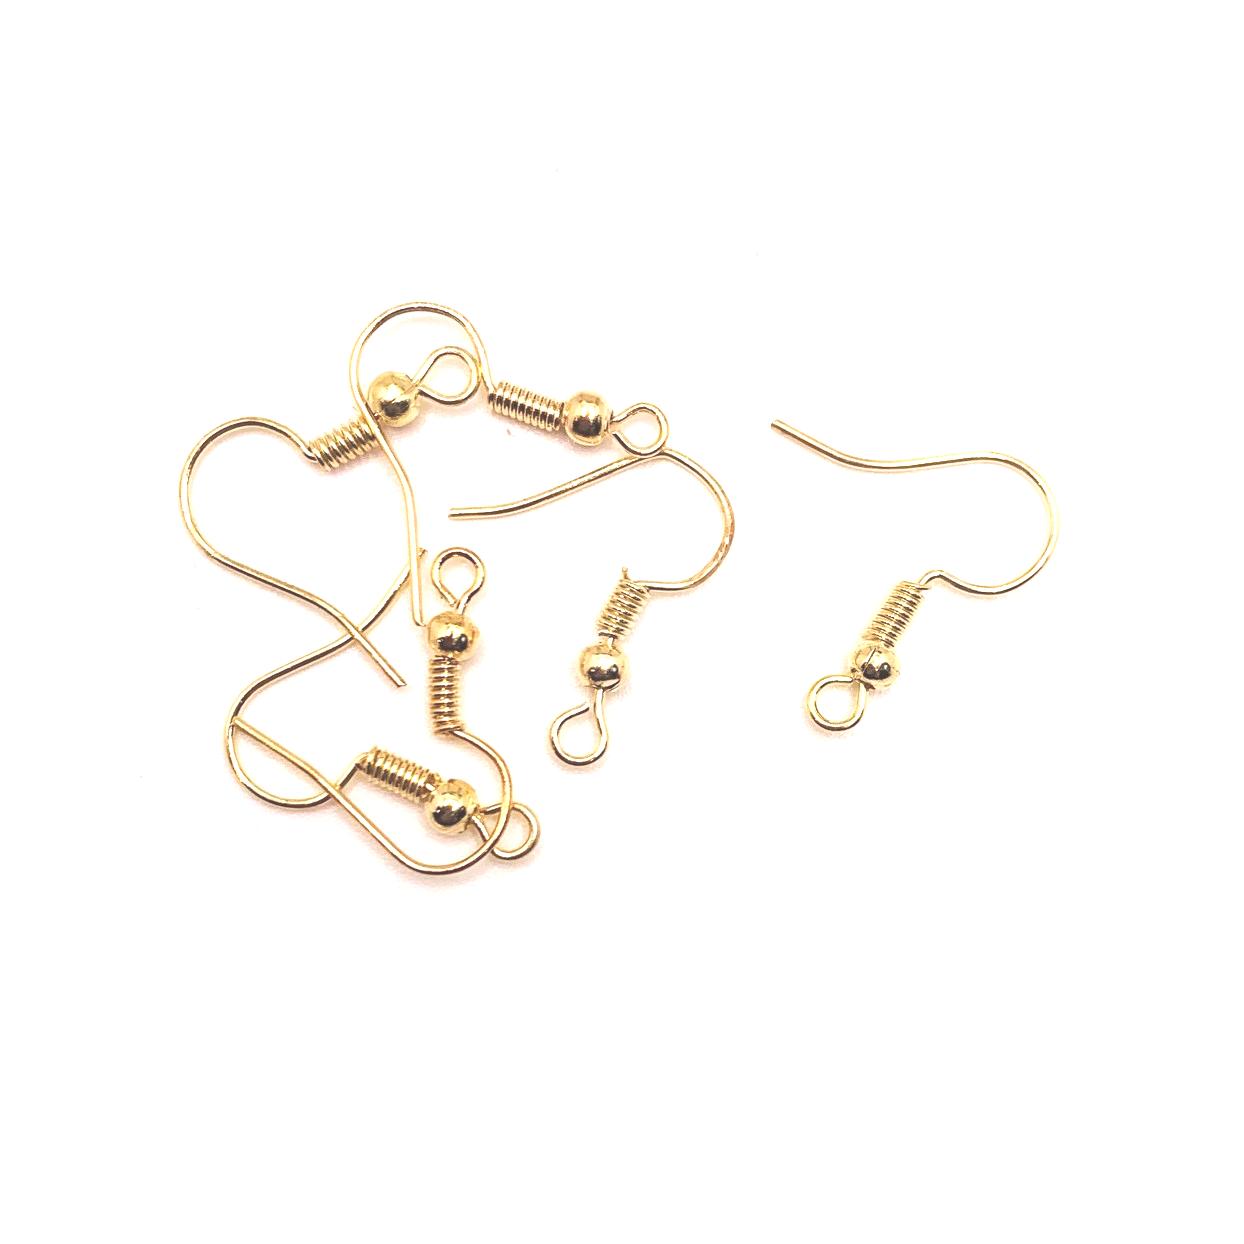 100 or 500 Pieces: KC Gold / Light Gold Plated Fish Hook Earring Wires with  Spring and Ball